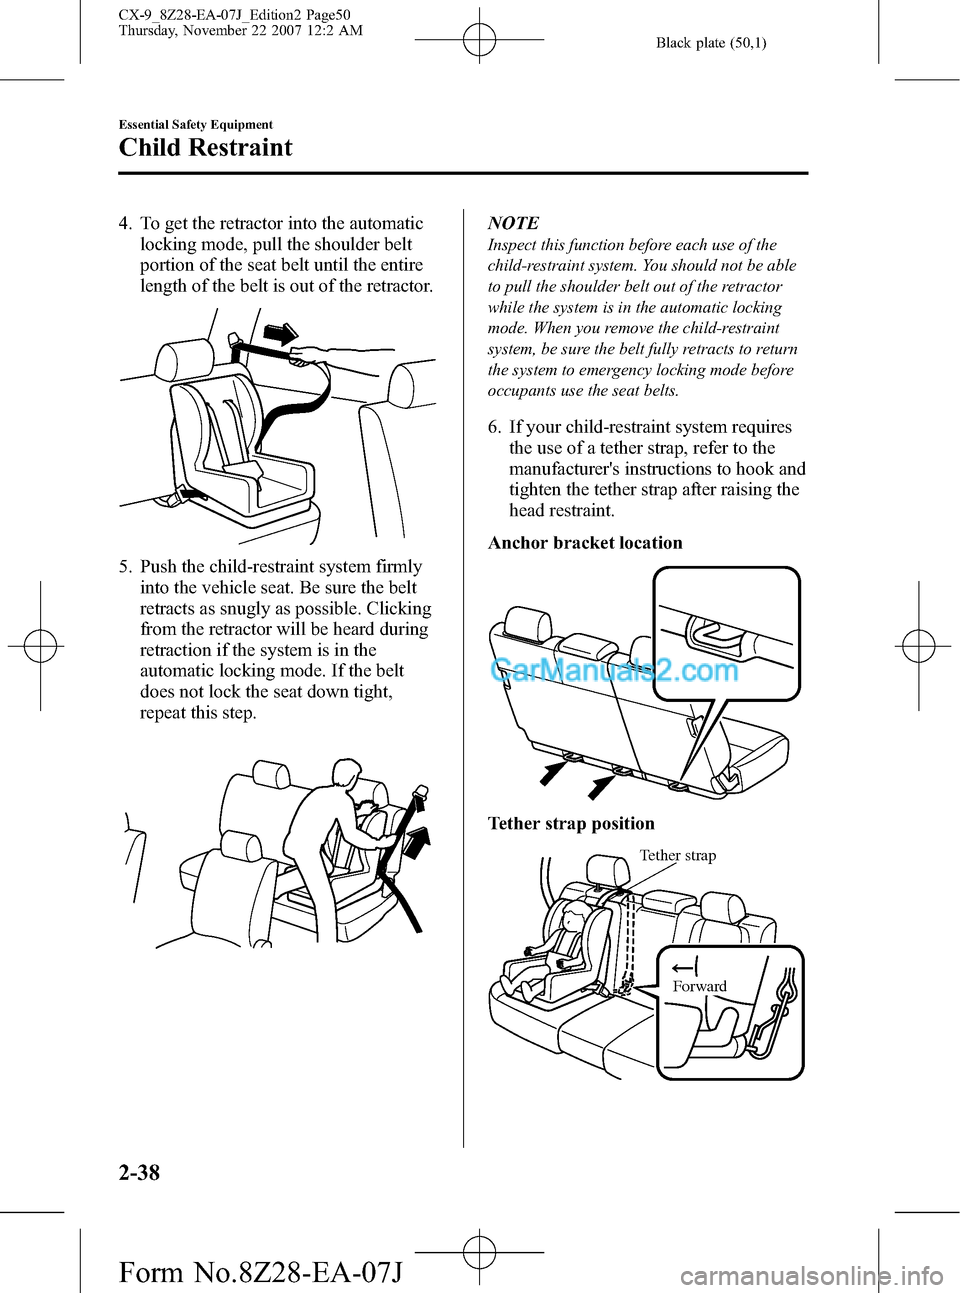 MAZDA MODEL CX-9 2008  Owners Manual (in English) Black plate (50,1)
4. To get the retractor into the automatic
locking mode, pull the shoulder belt
portion of the seat belt until the entire
length of the belt is out of the retractor.
5. Push the chi